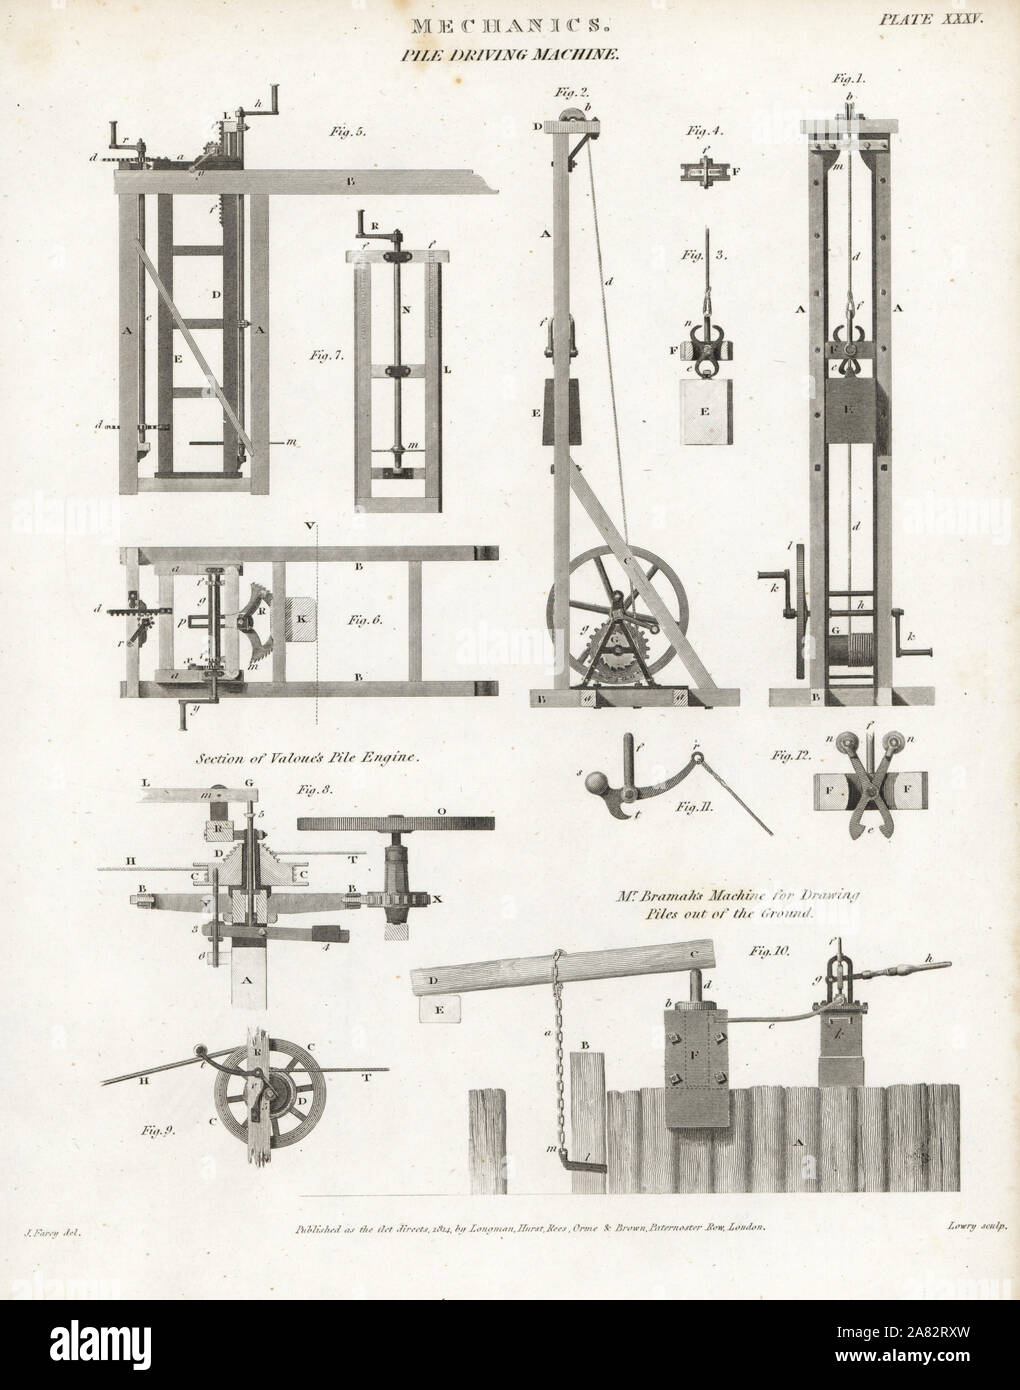 Charles Valoue's pile-driving machine used at Westminster Bridge 1739 and Joseph Bramah's pile-drawing machine. Copperplate engraving by Wilson Lowry after a drawing by J. Farey from Abraham Rees' Cyclopedia or Universal Dictionary of Arts, Sciences and Literature, Longman, Hurst, Rees, Orme and Brown, London, 1814. Stock Photo